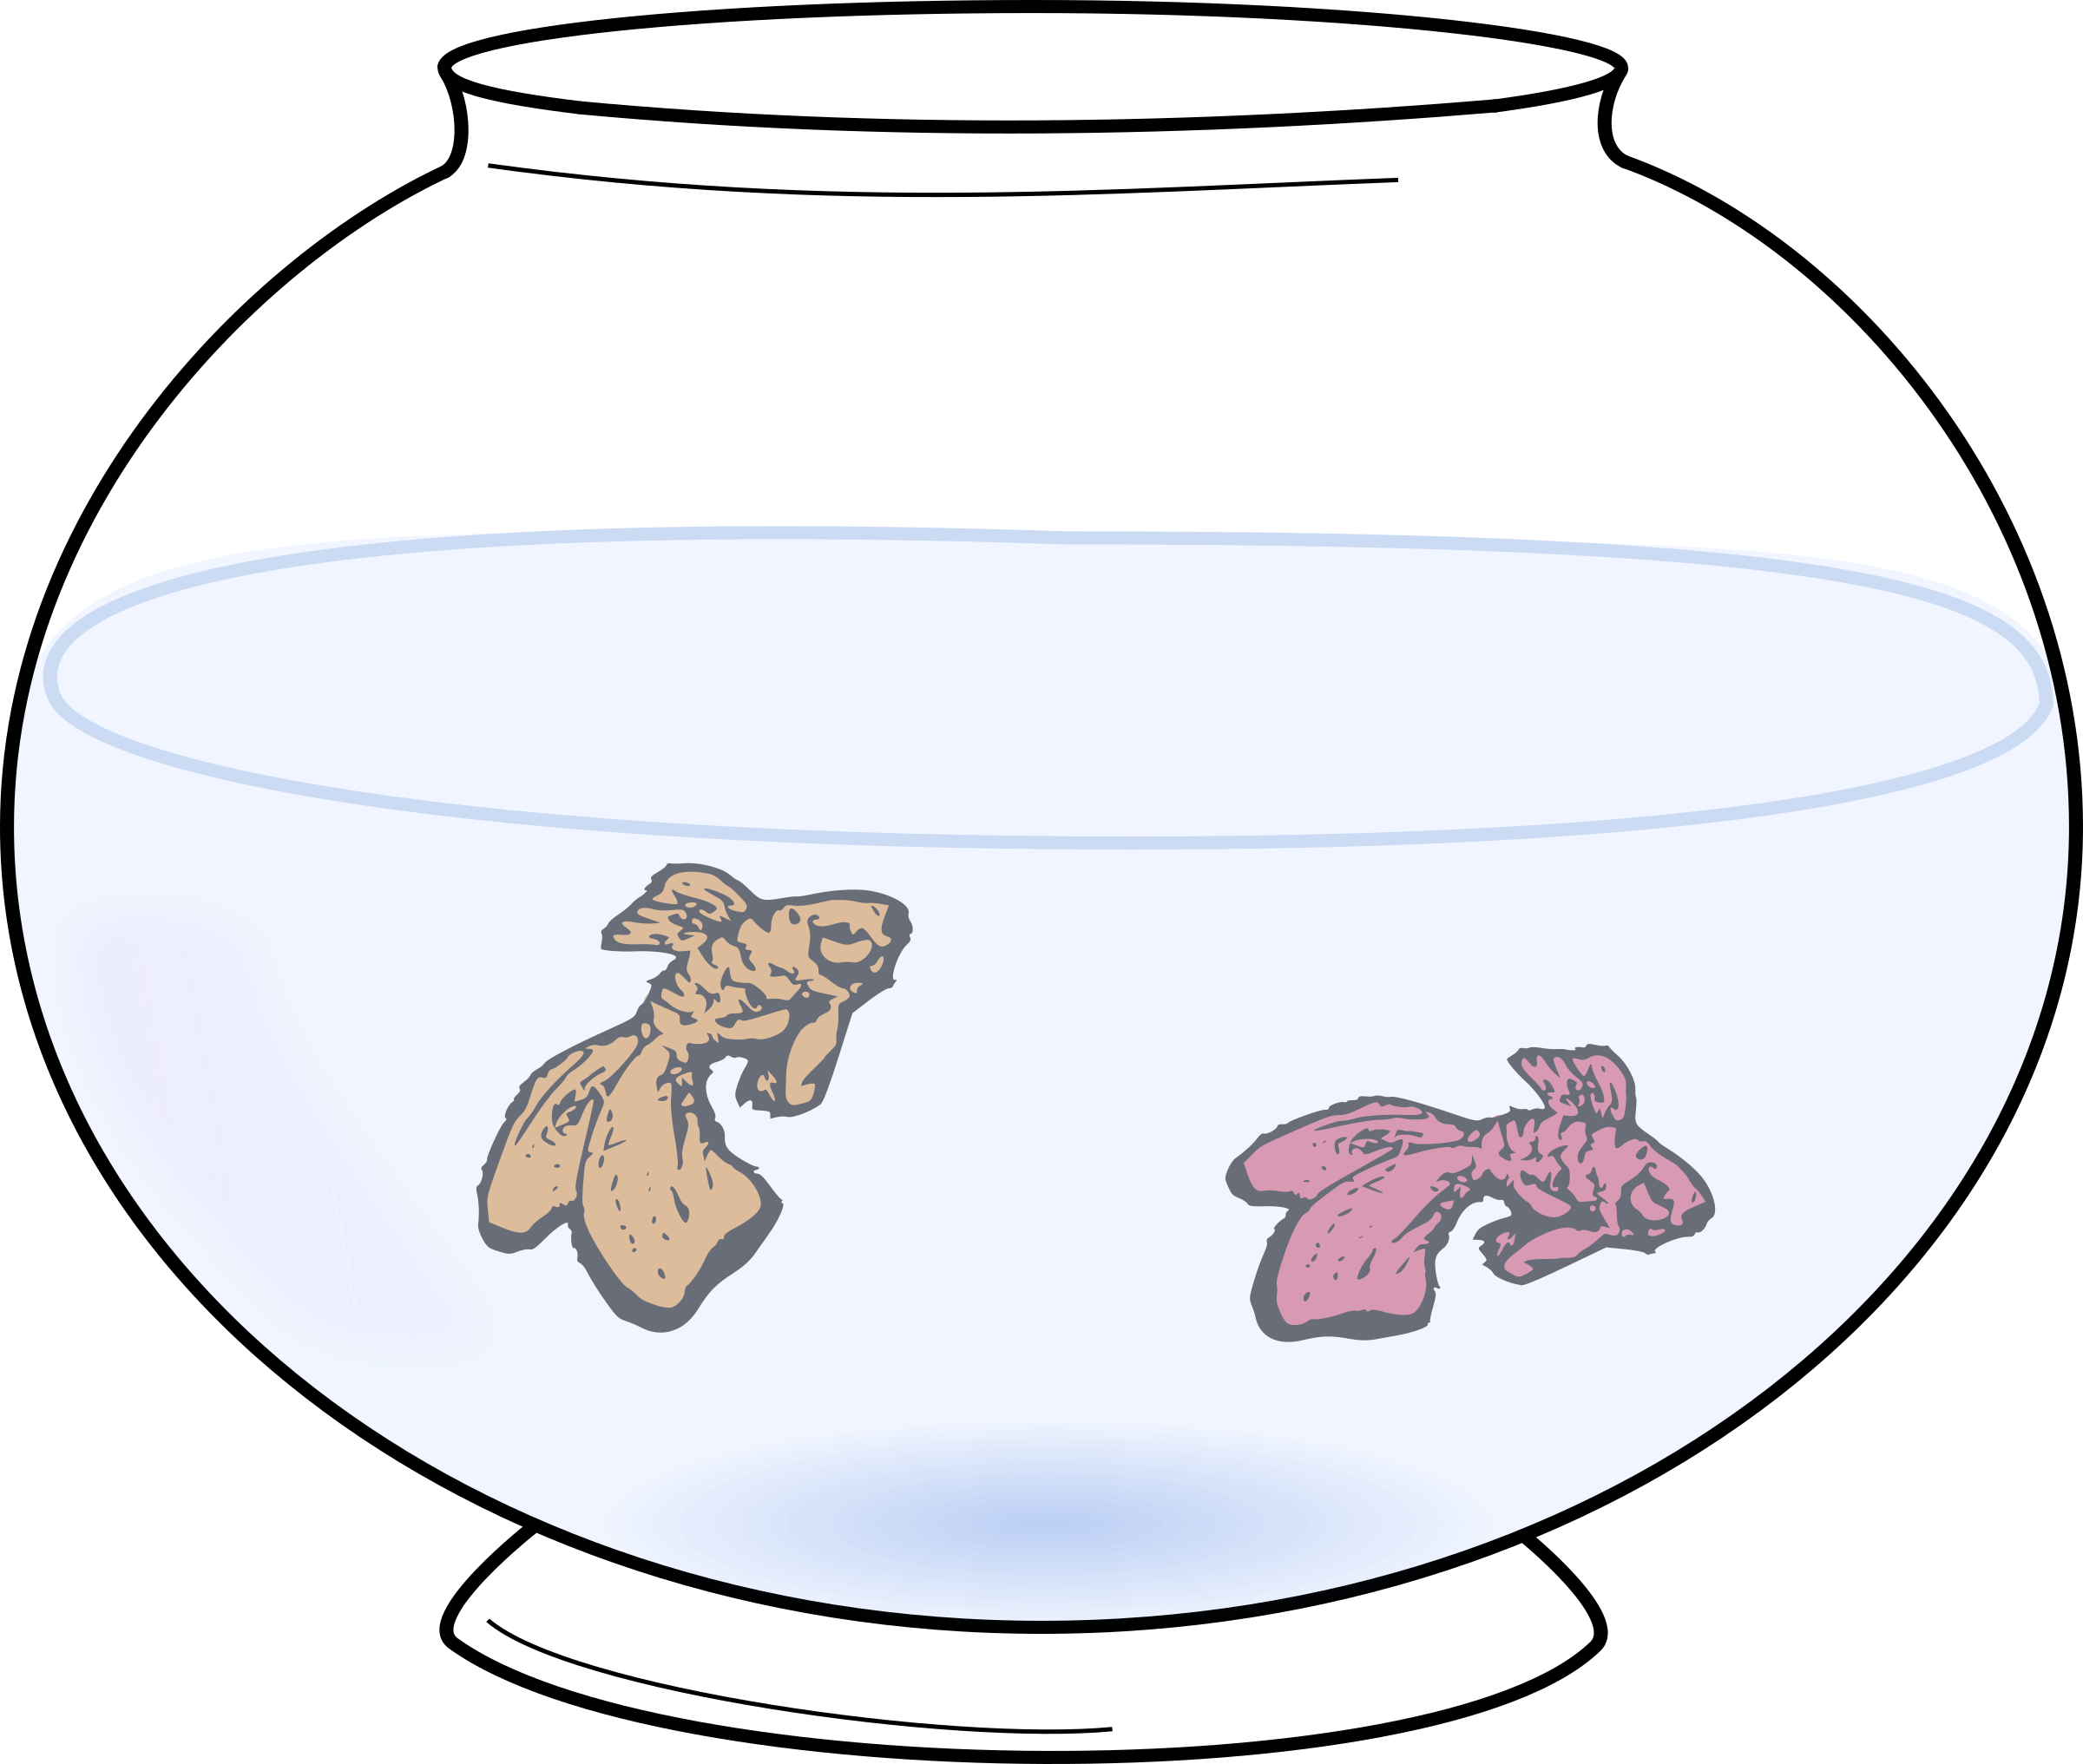 With big image png. Fish clipart bowl